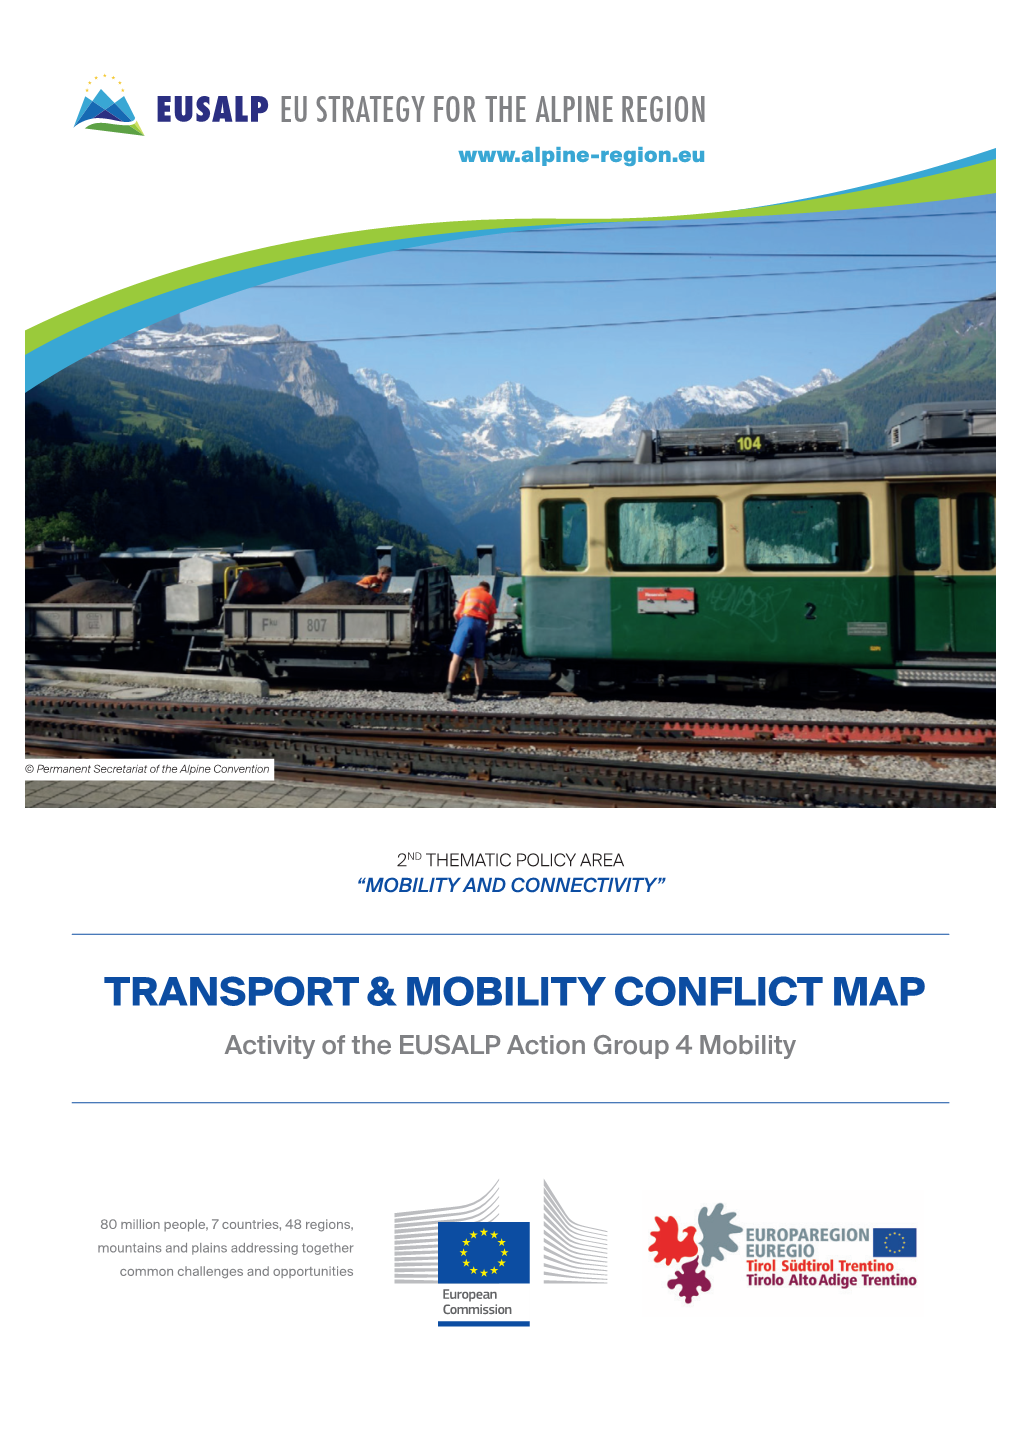 Transport & Mobility Conflict